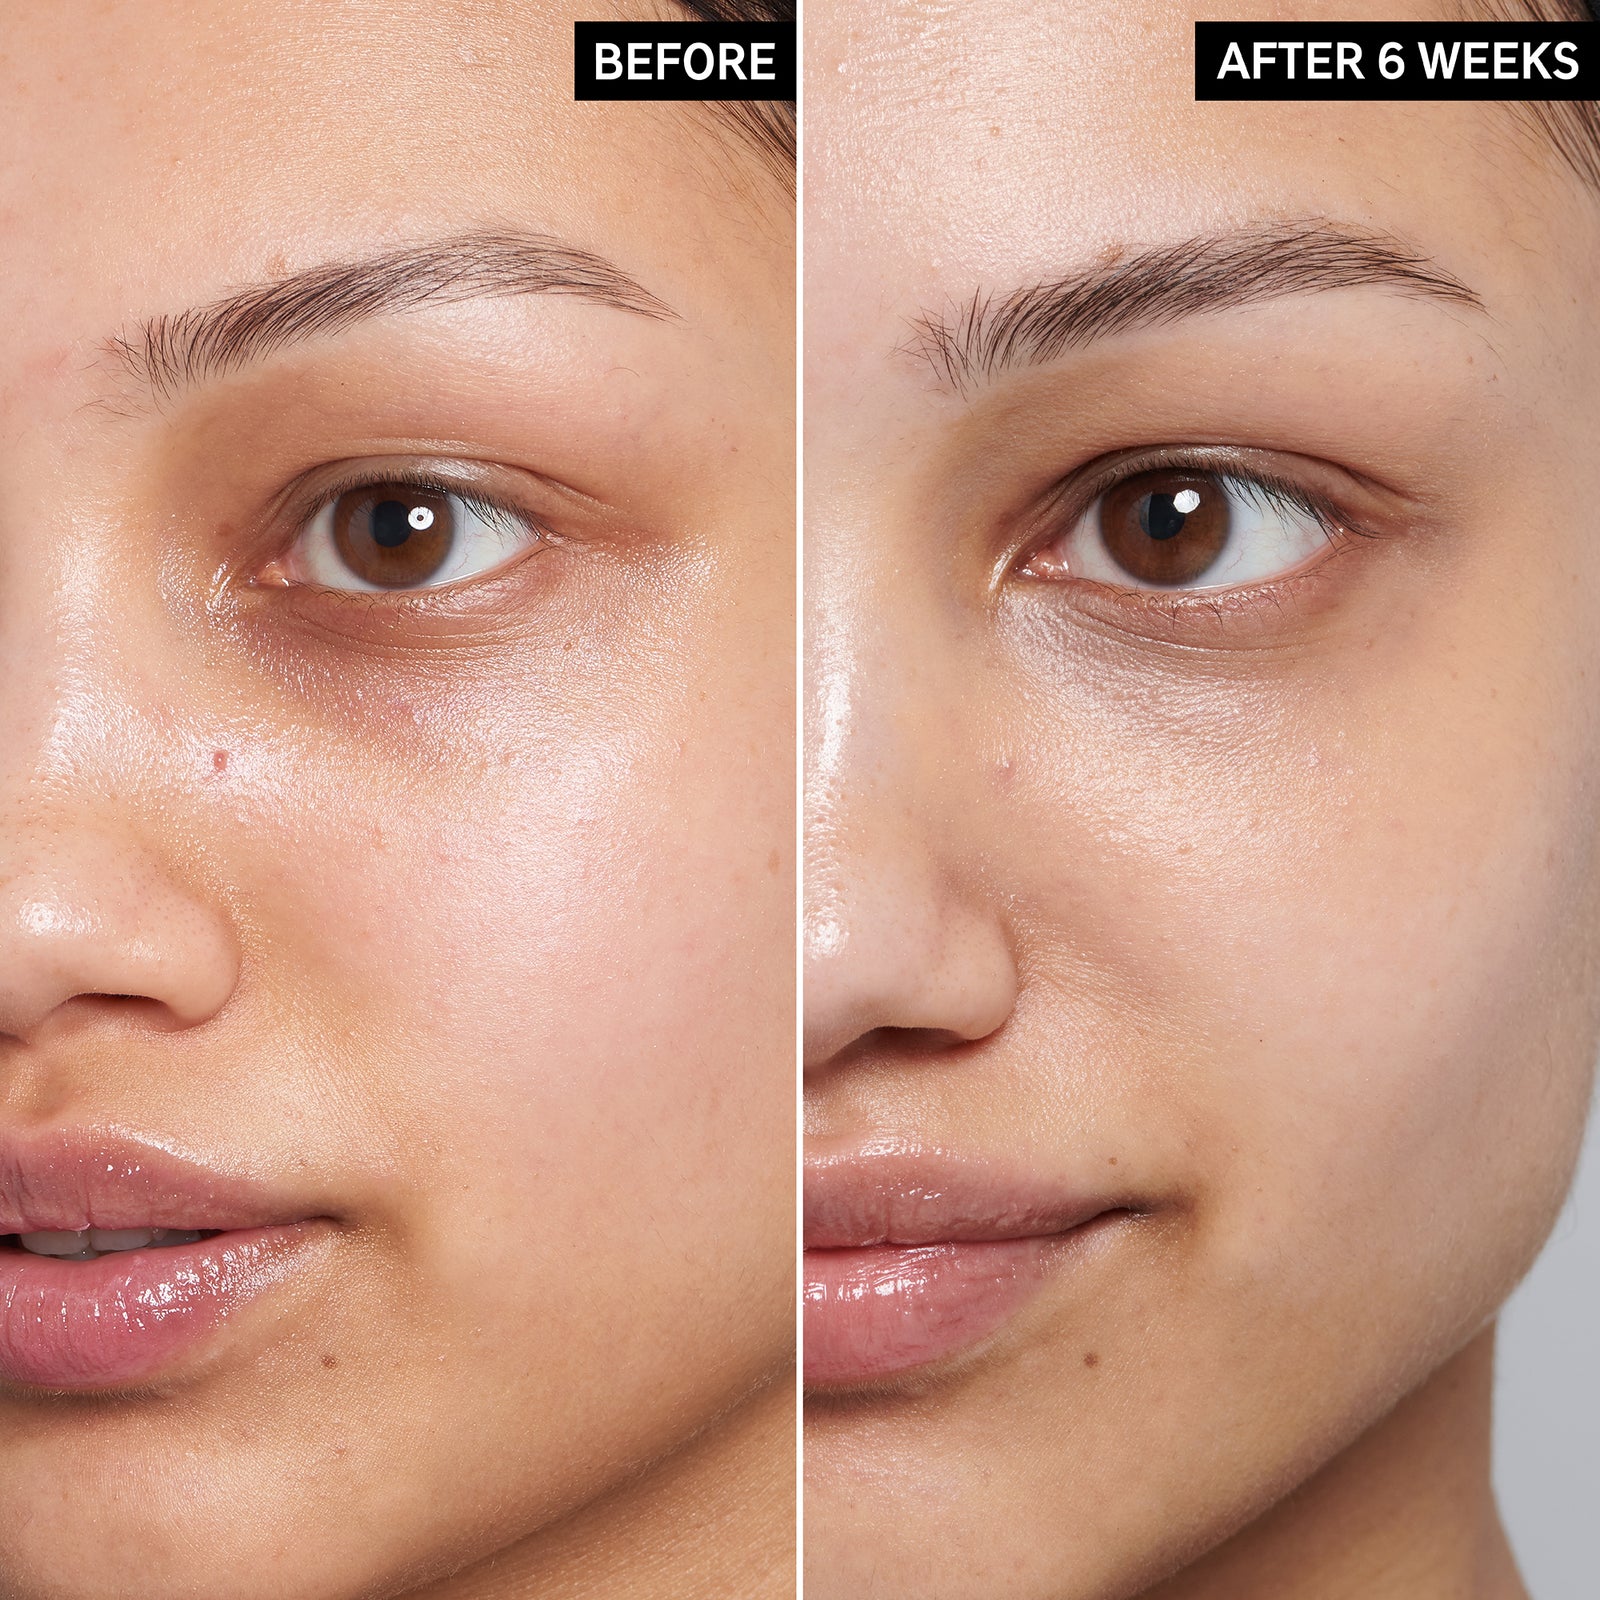  Puffy Eye GEL Instant results – Naturally rapid